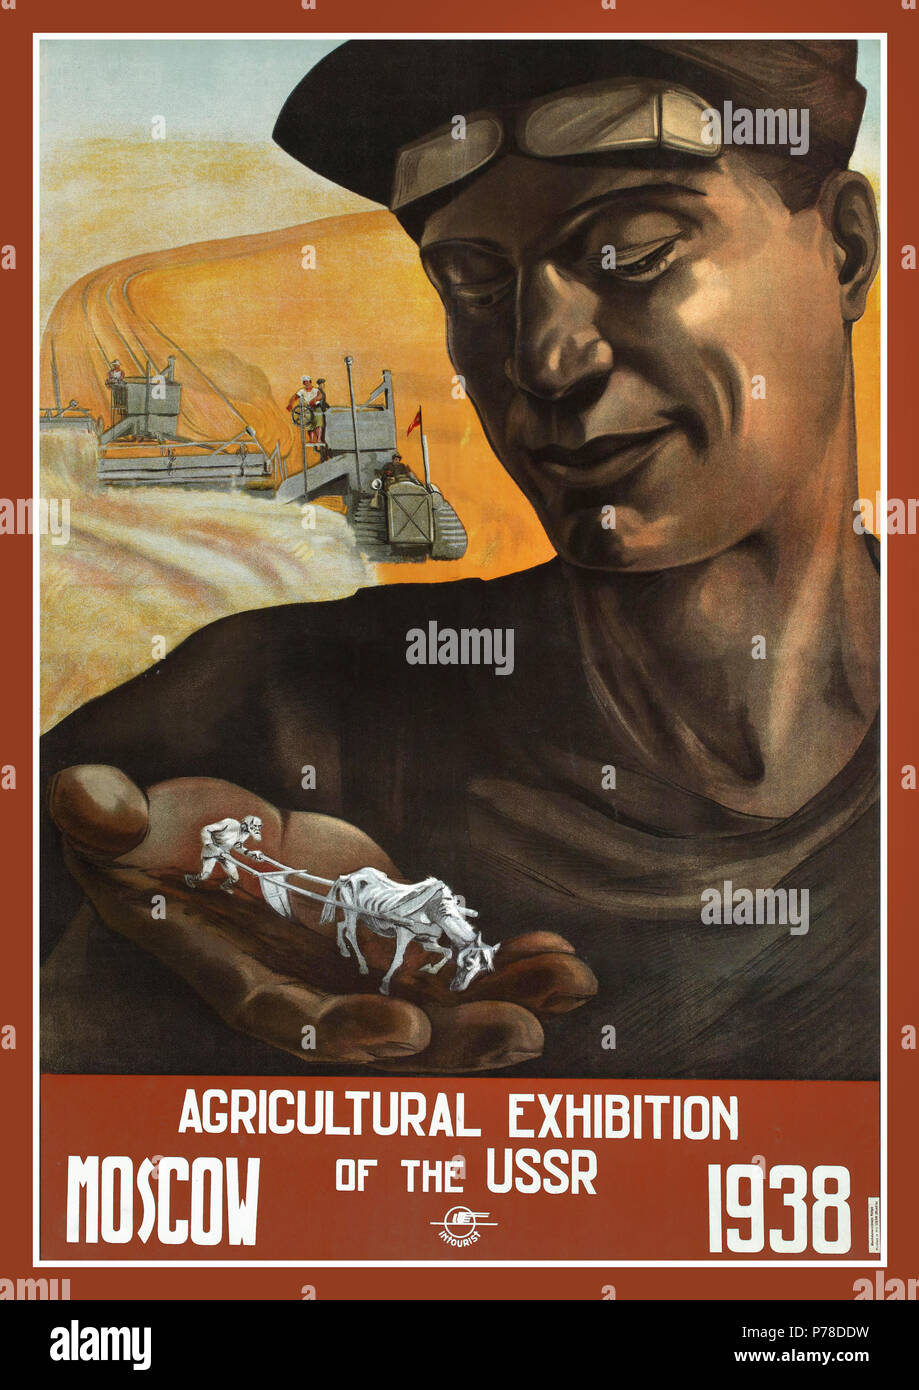 Vintage USSR Soviet Union Poster Agricultural exhibition of The USSR 1930's by Intourist company Moscow Soviet Union USSR 1938 Stock Photo